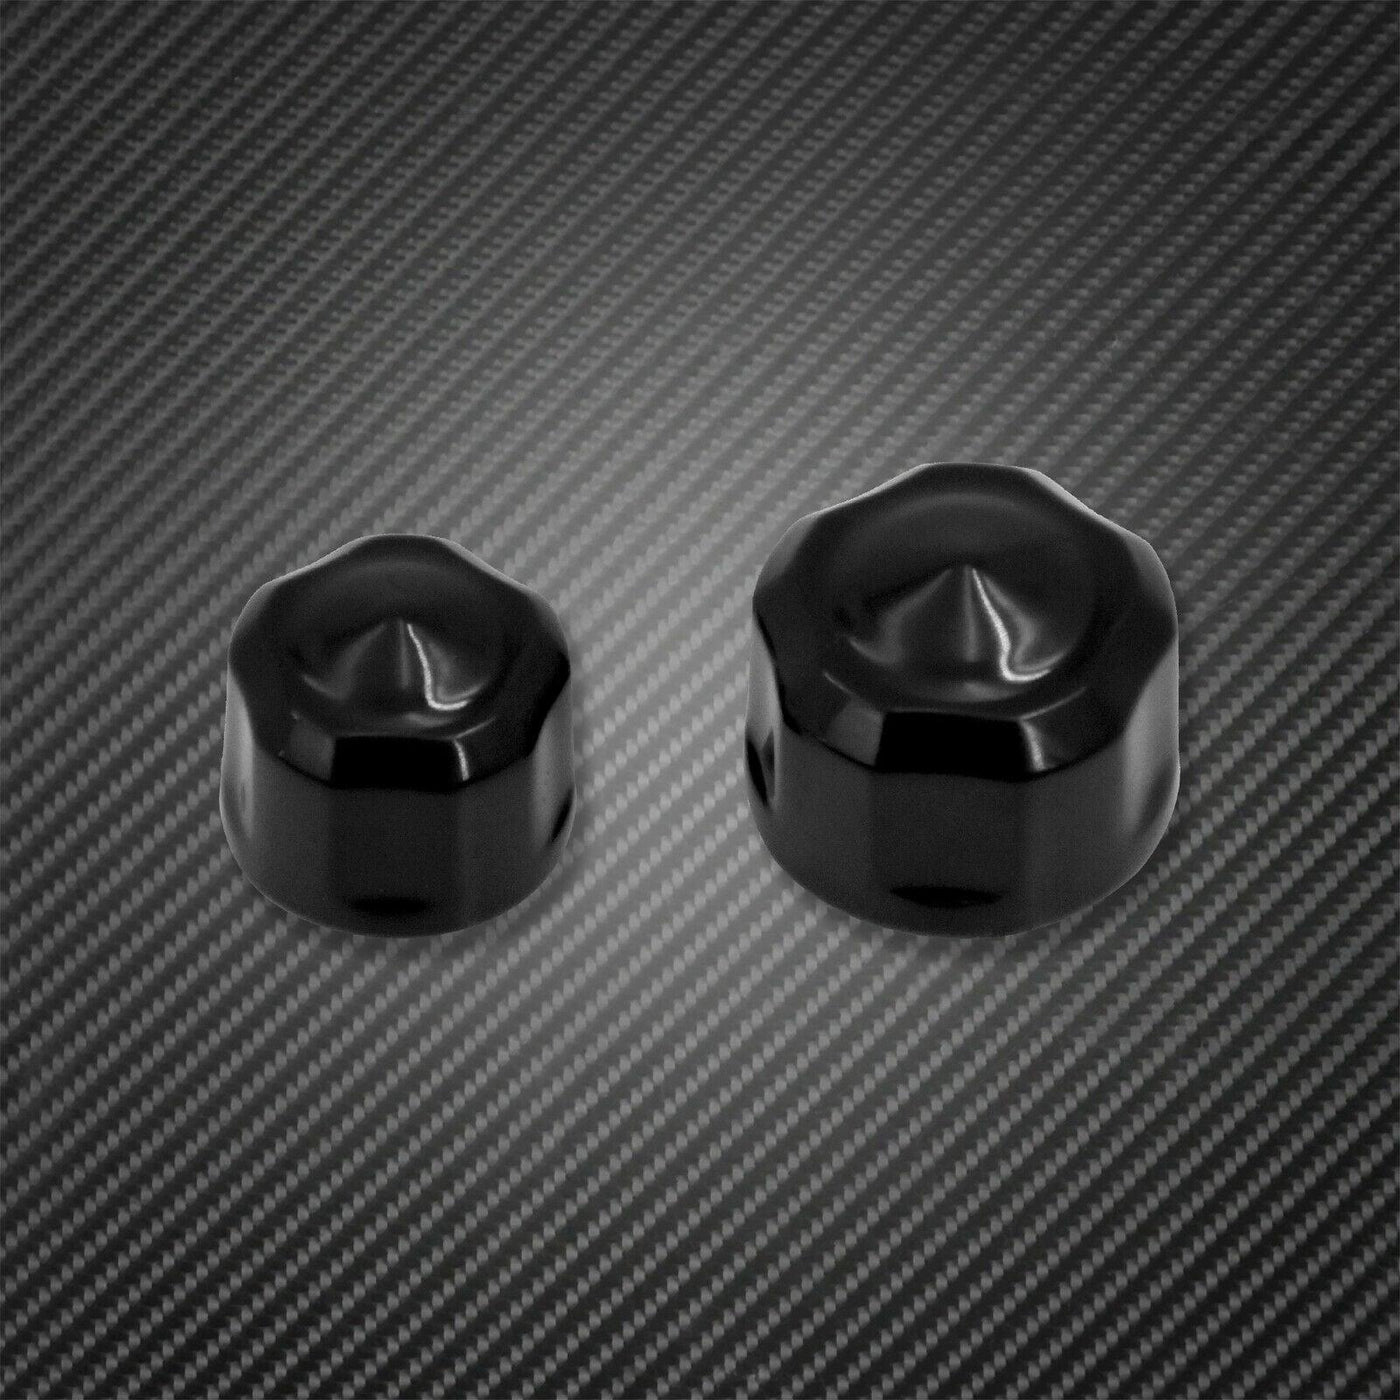 Plastic Engine Kaps Bolt Covers Cap Fit For Harley M8 Touring Softail 2018-2021 - Moto Life Products